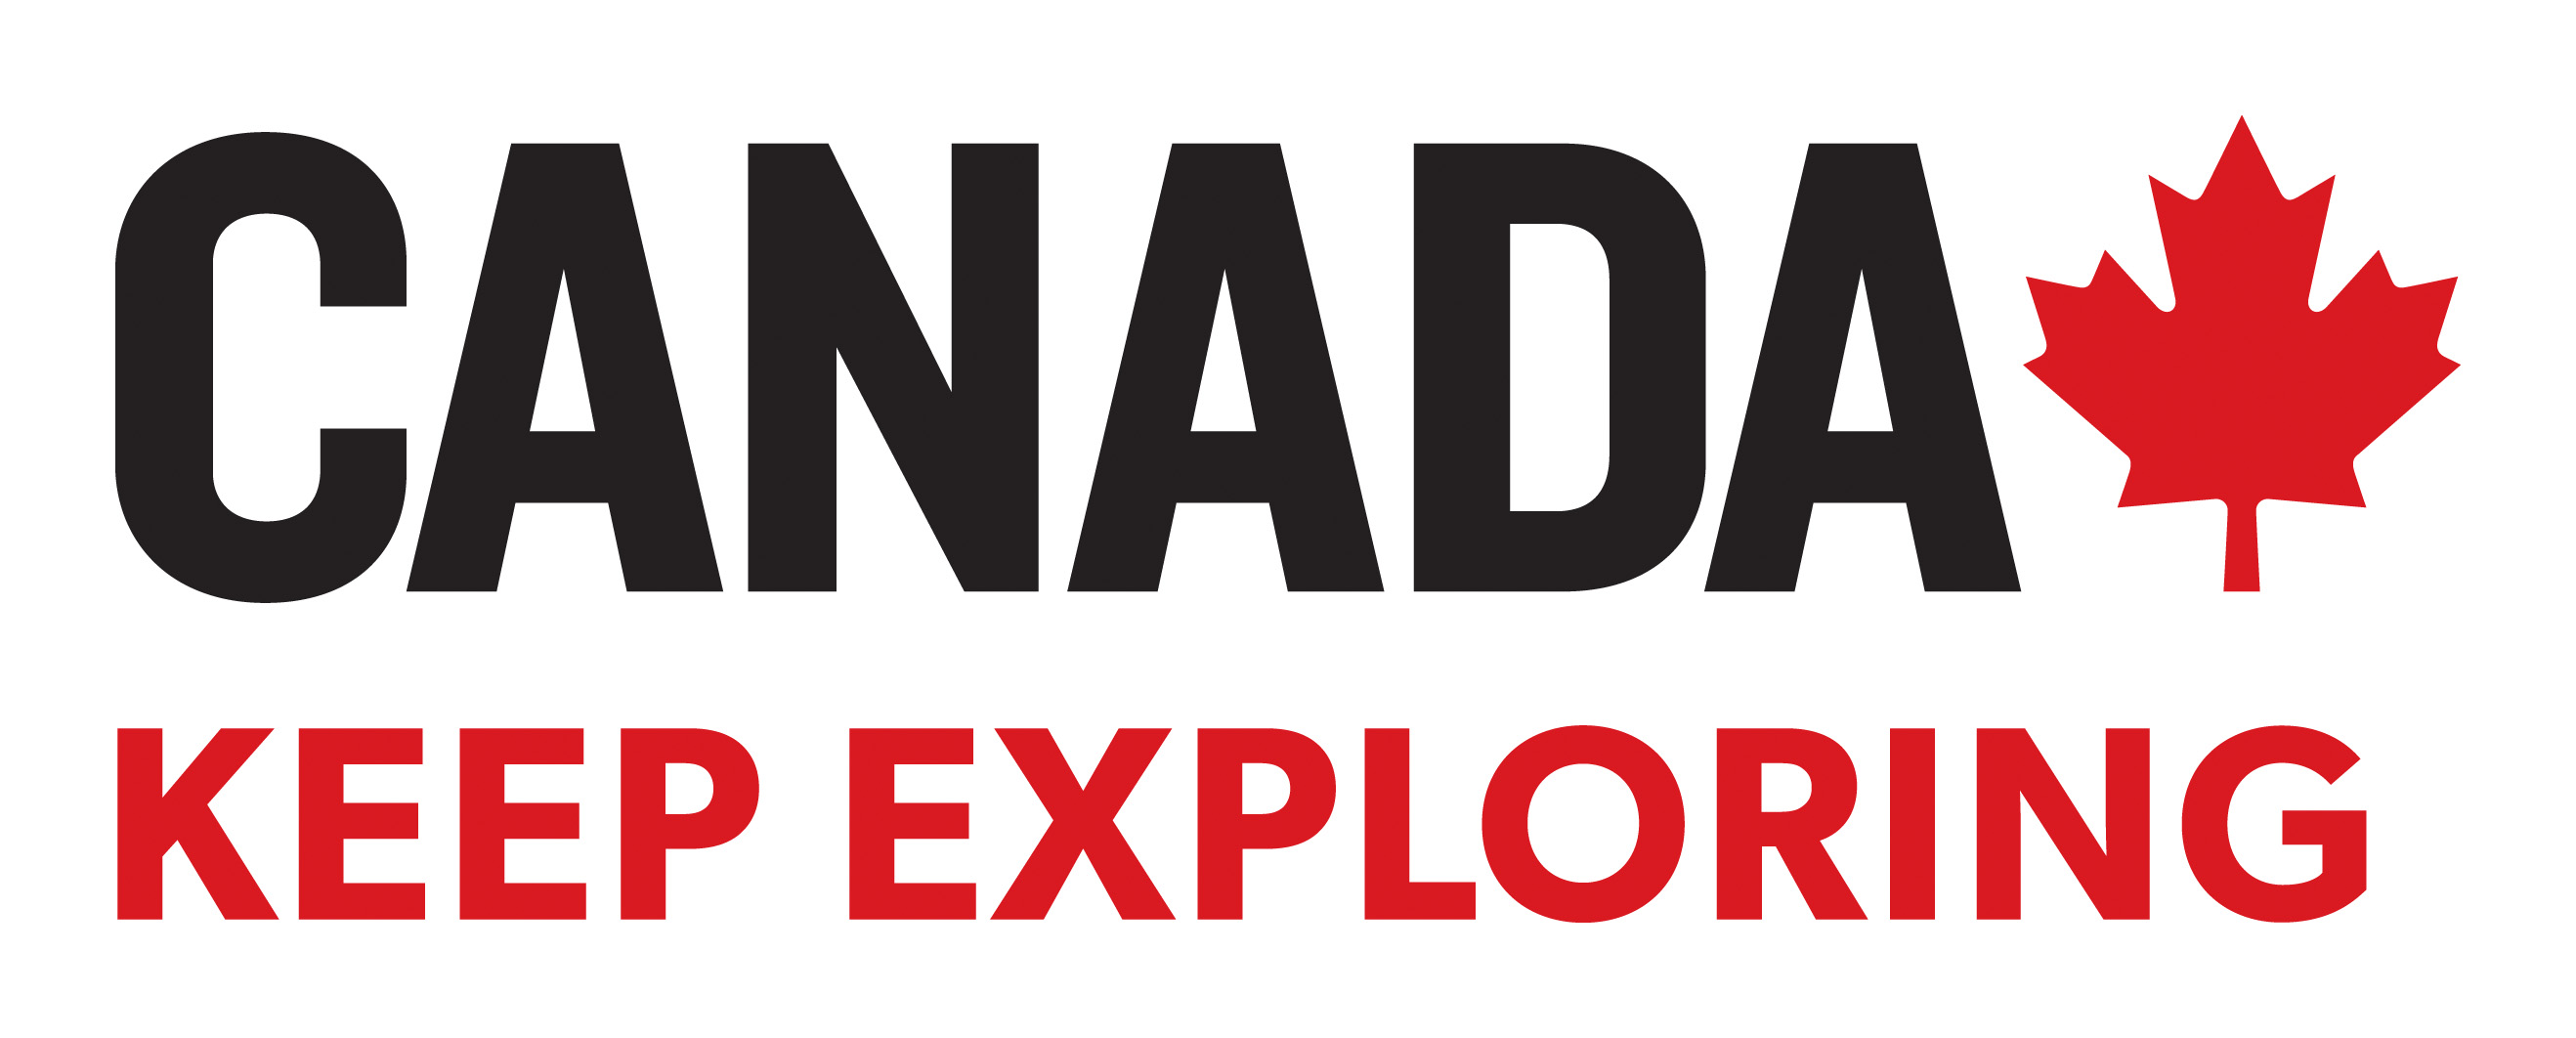 canadian tourism board